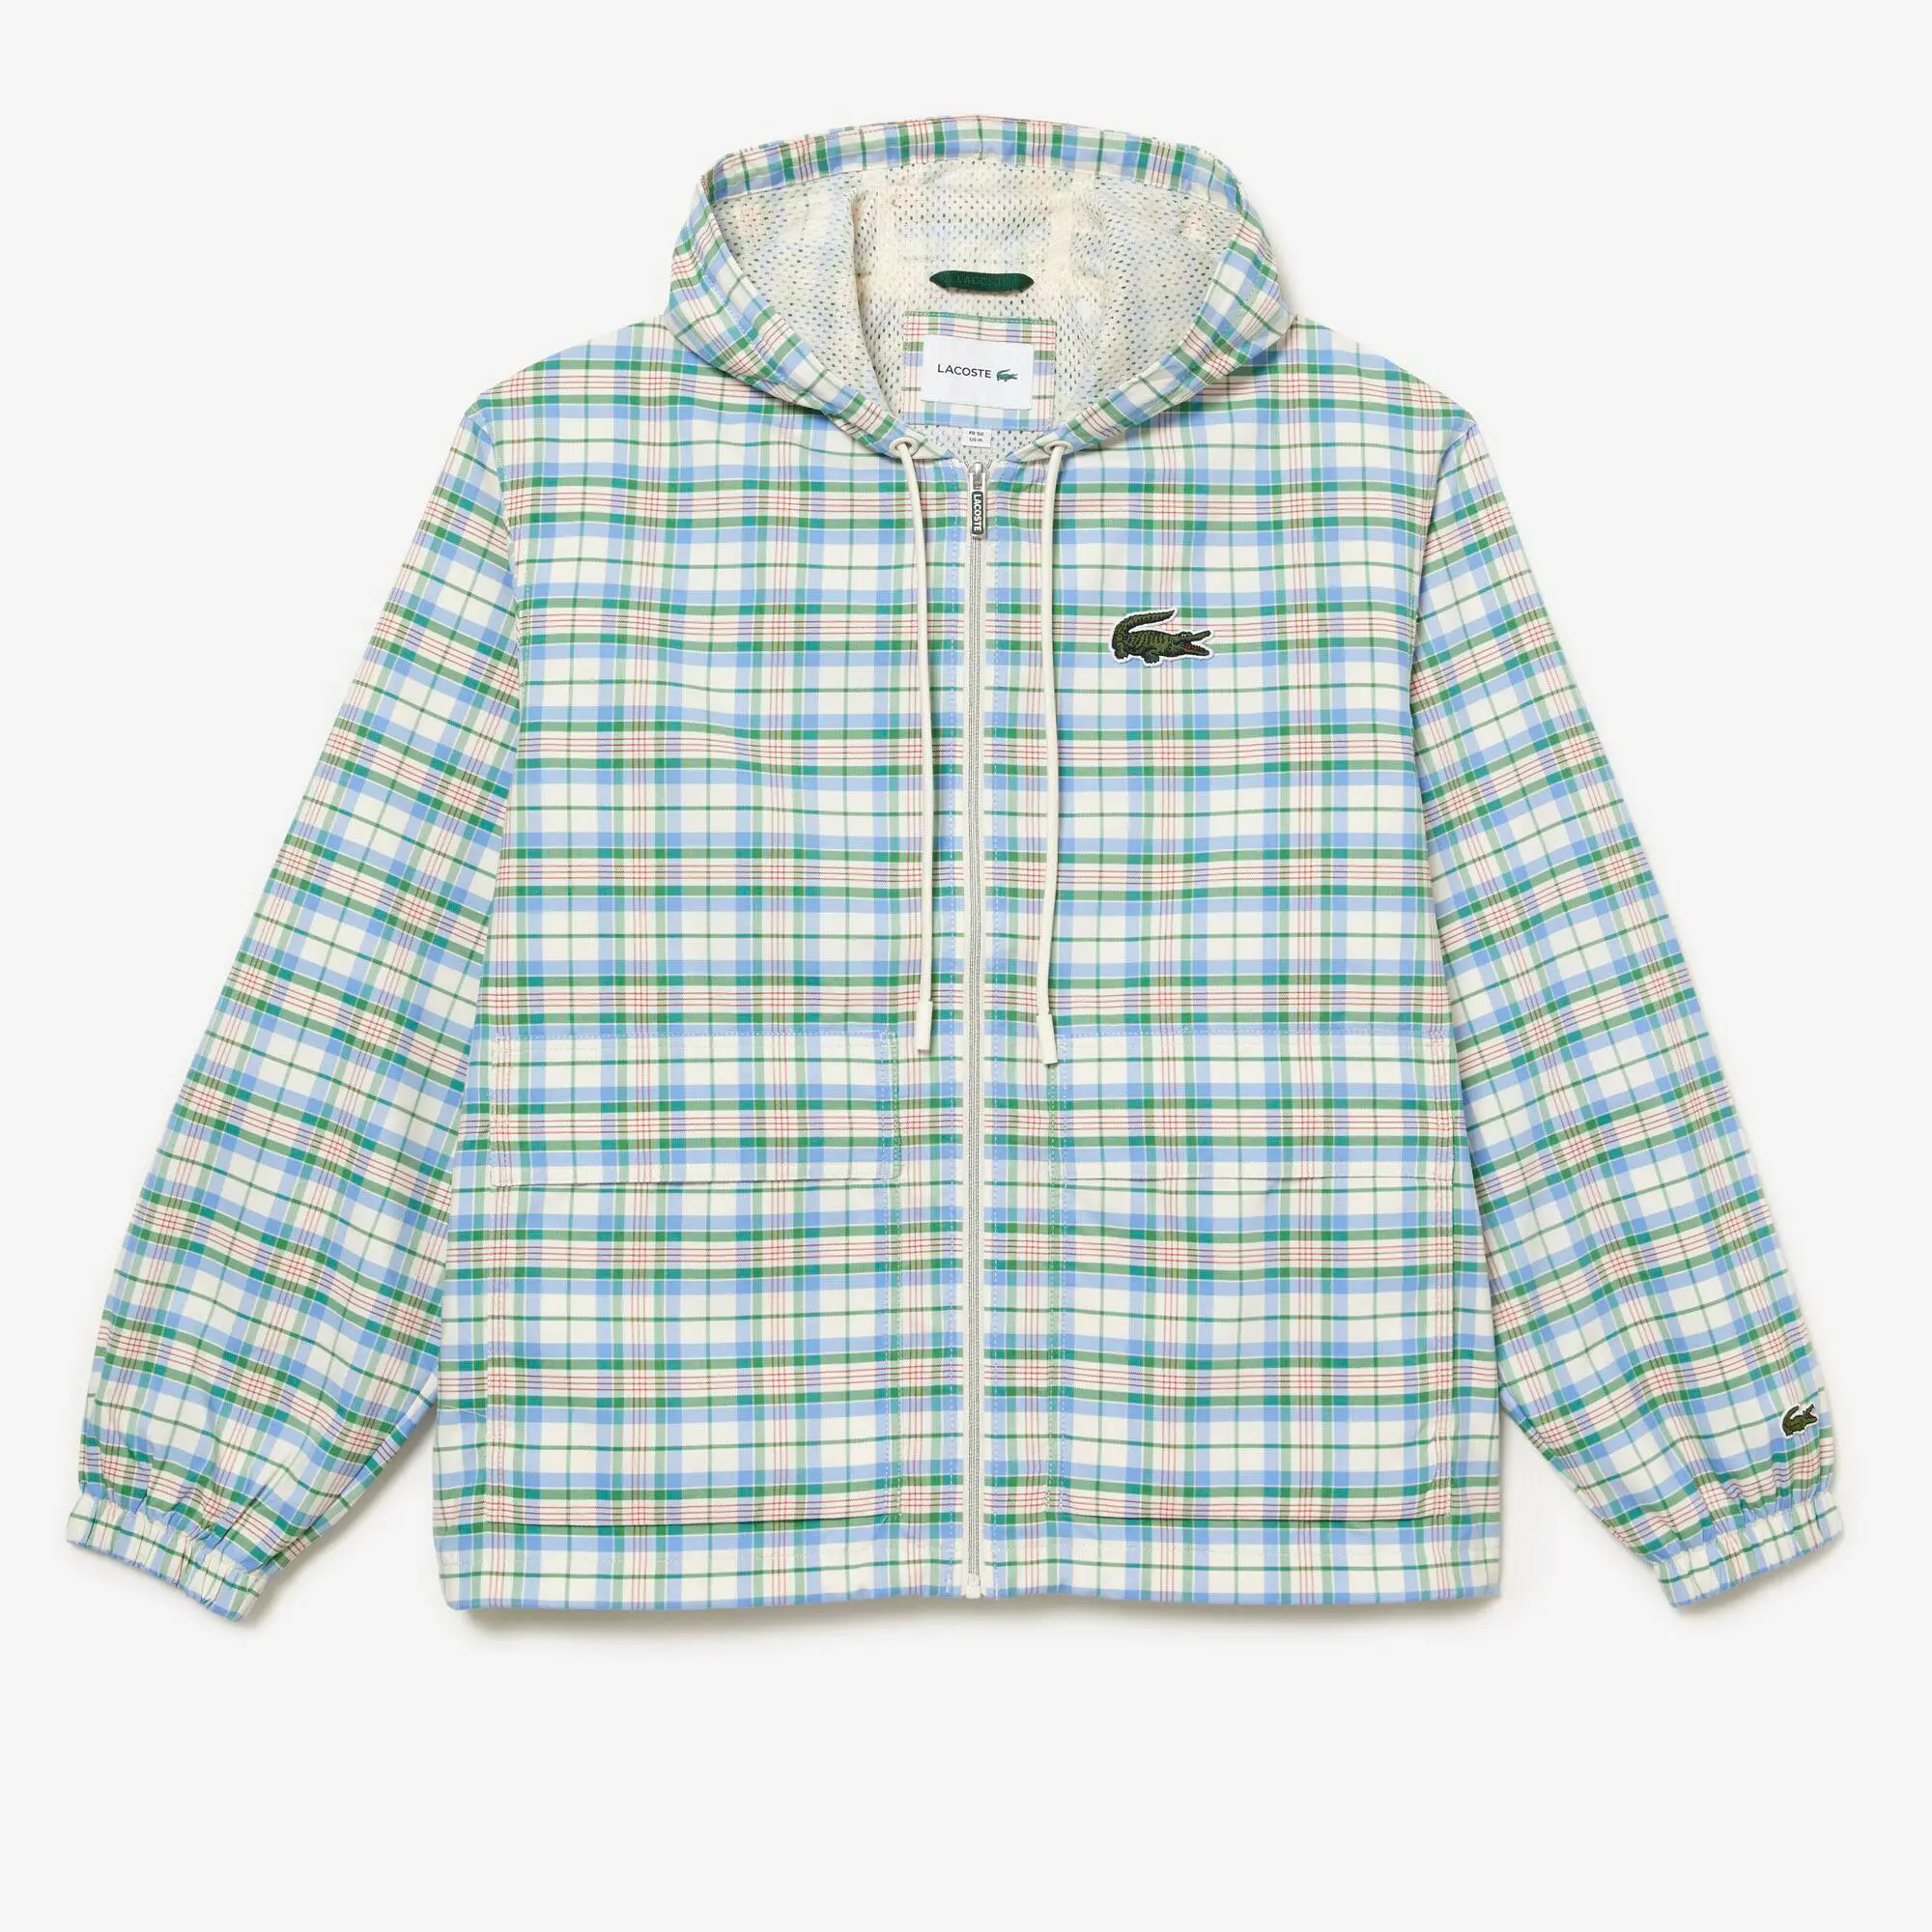 Lacoste Men’s Checked Jacket. 2